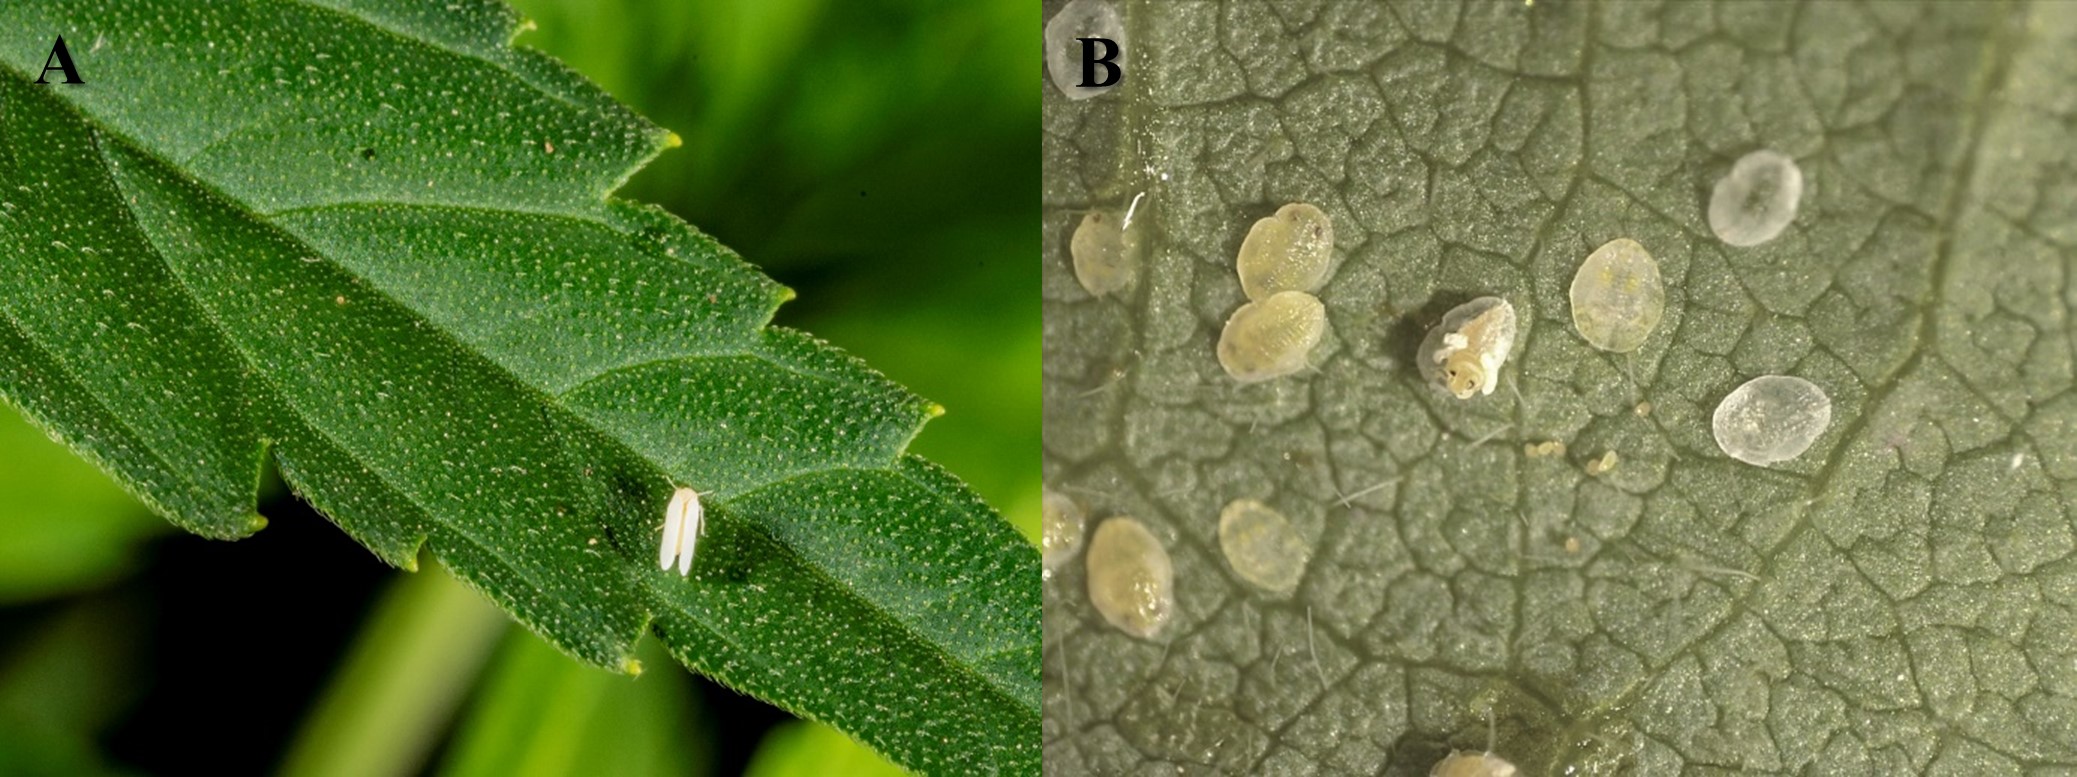 Figure 2. Adult whitefly on a hemp leaf (A), and third/fourth-instar whitefly nymphs with emerging whitefly adult (B). (Photo Credits: Zachary Serber and John Obermeyer, Purdue Entomology) *Pictures not to scale.